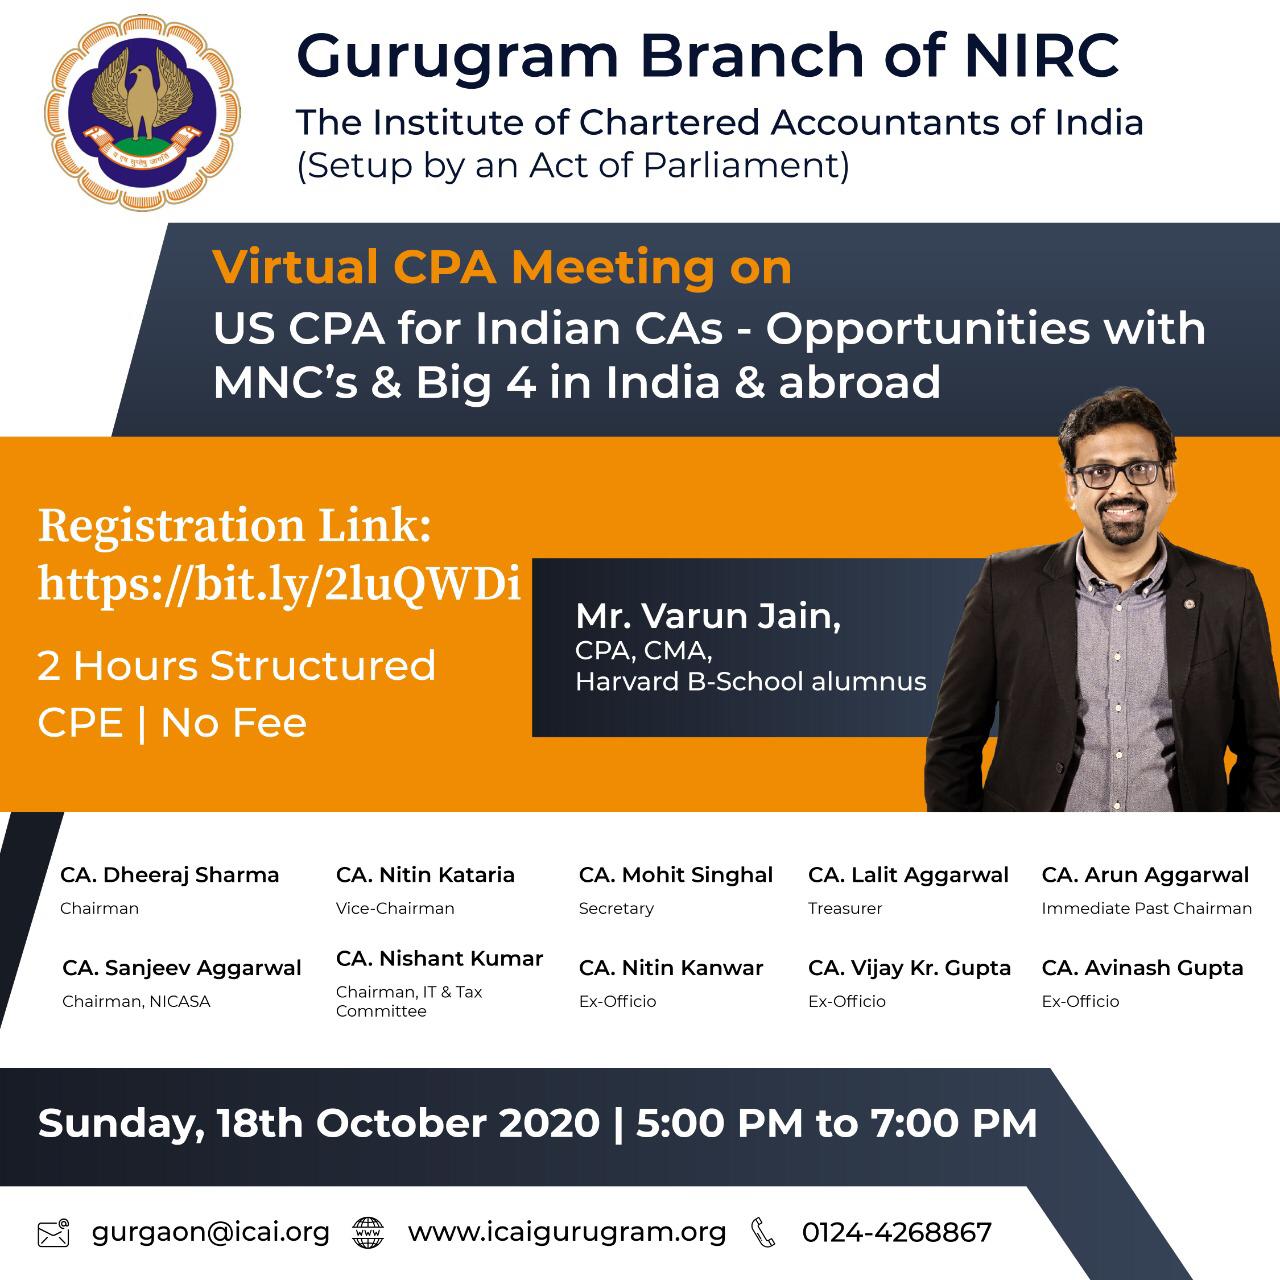 Virtual CPE Meeting on US CPA for Indian CAs - Opportunities with MNC’s & Big 4 in India and abroad